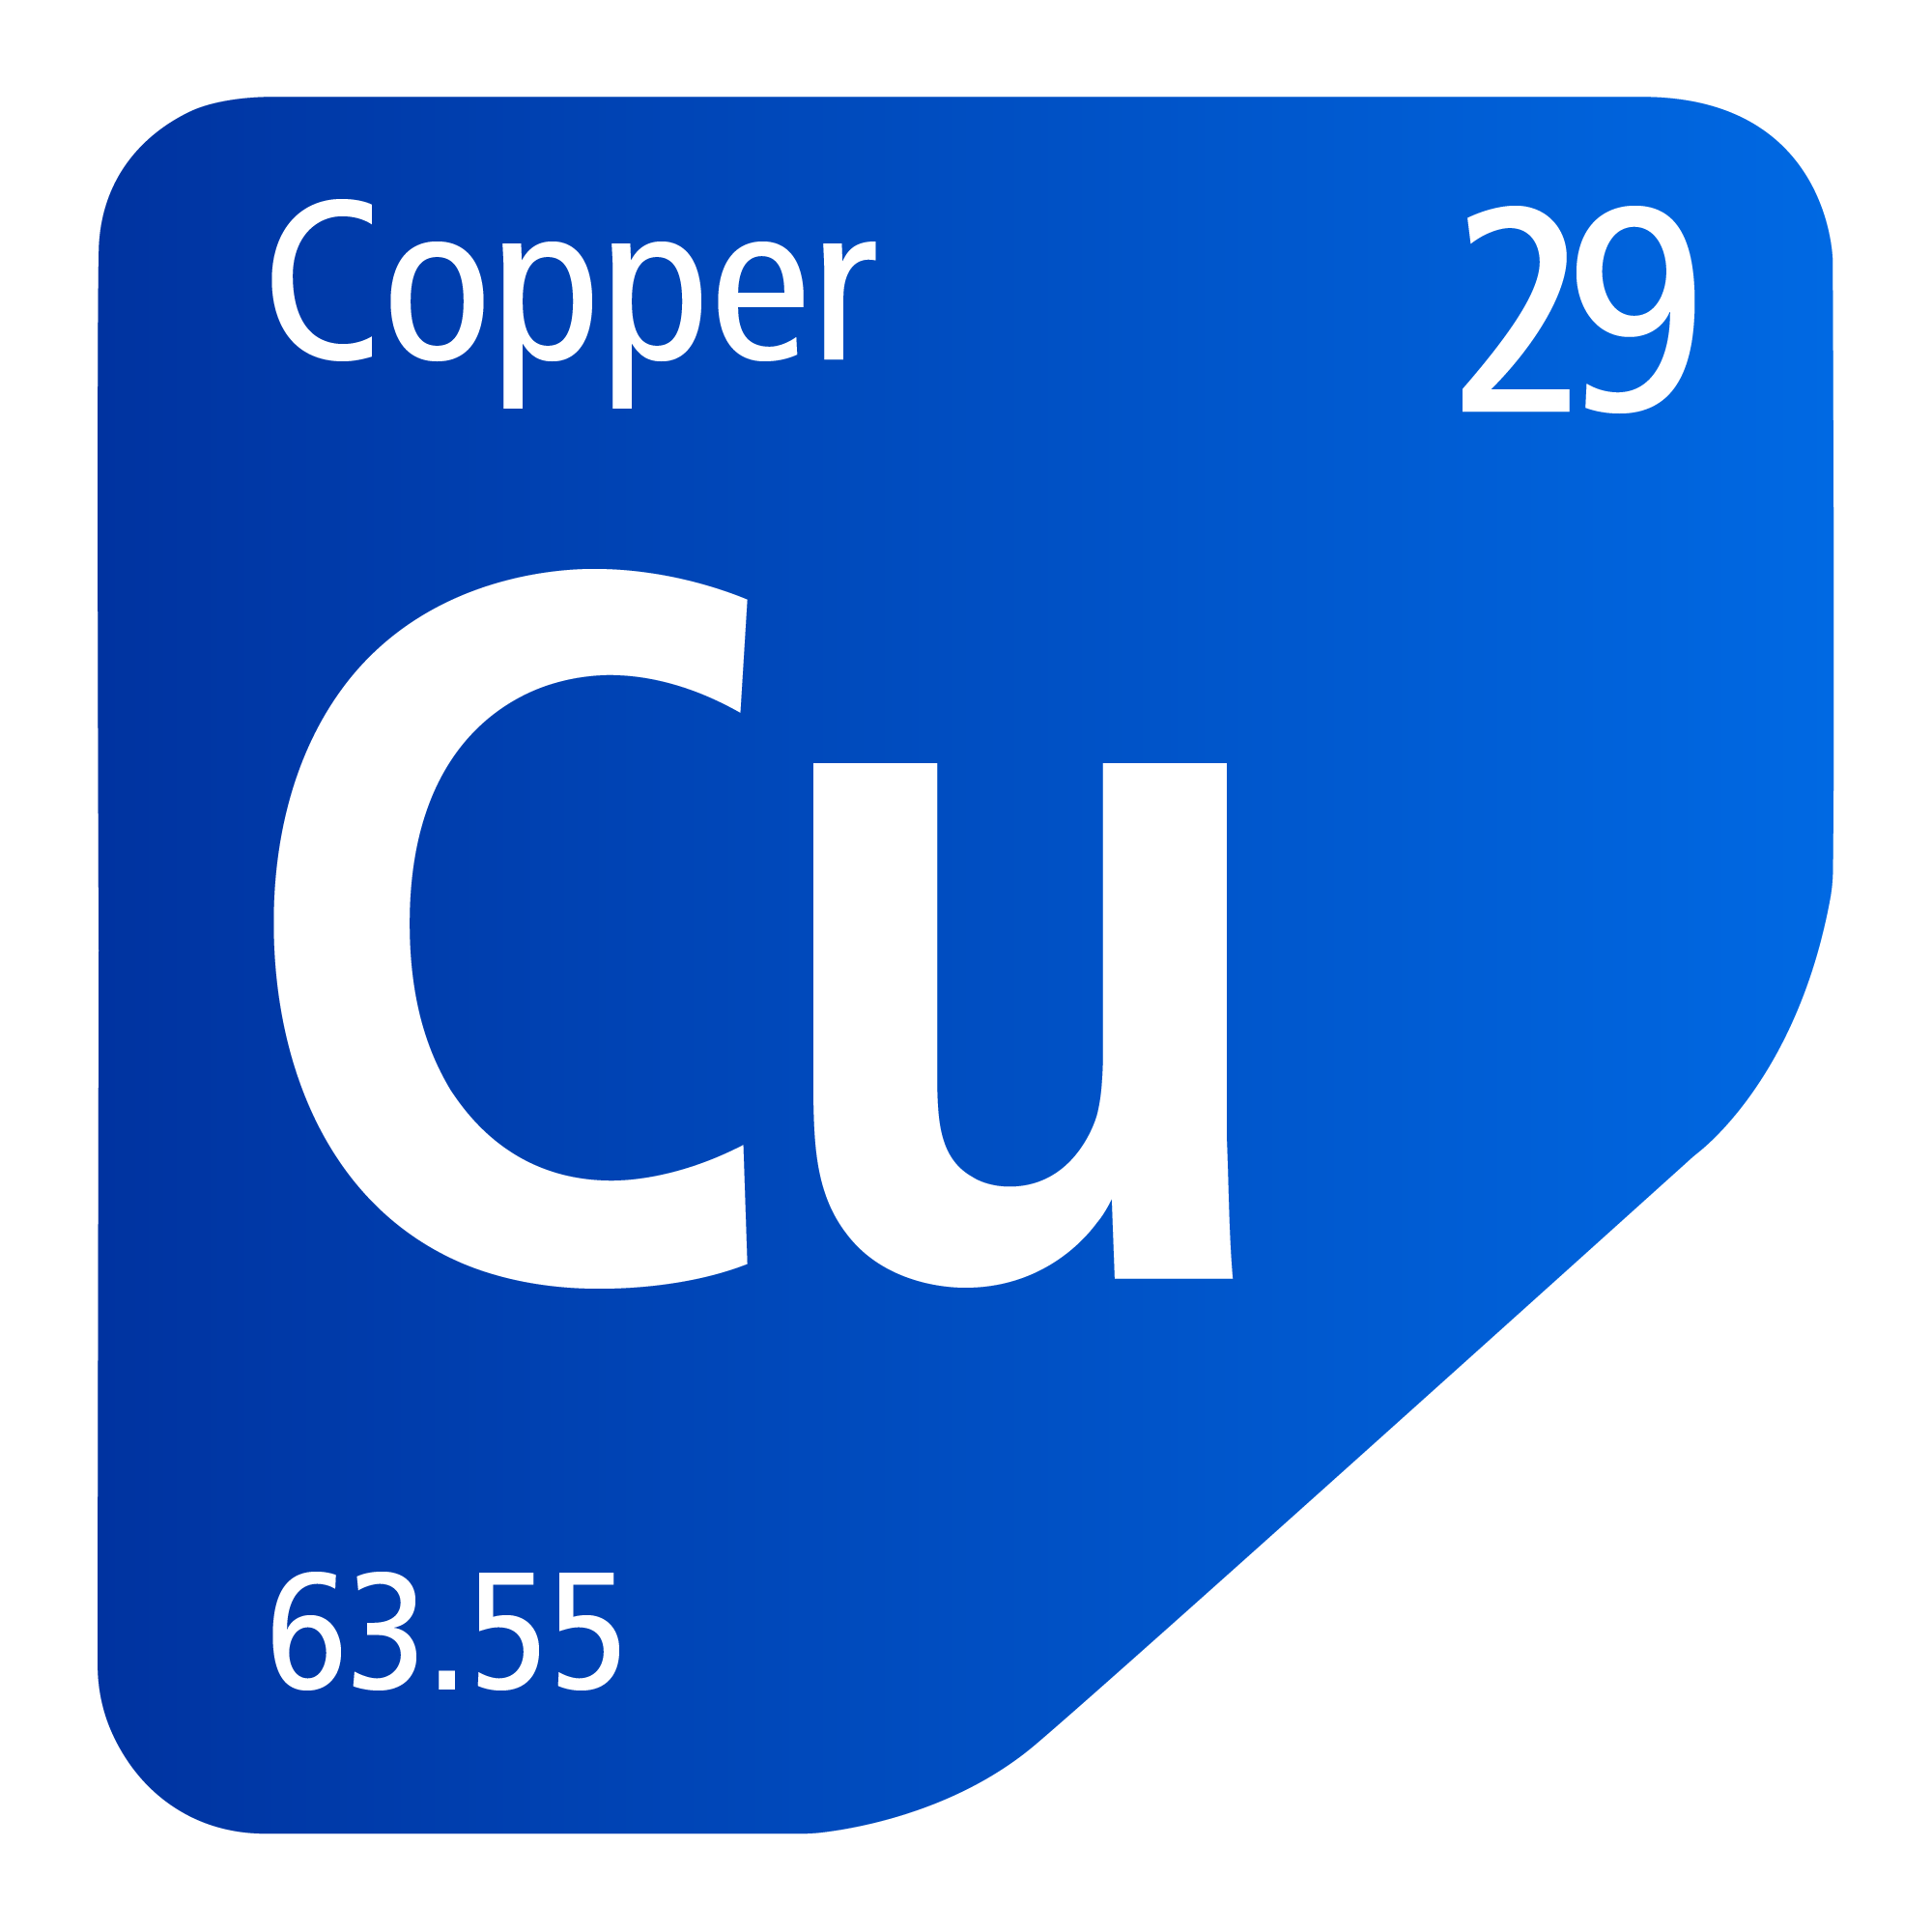 List of Behansar products in Copper category